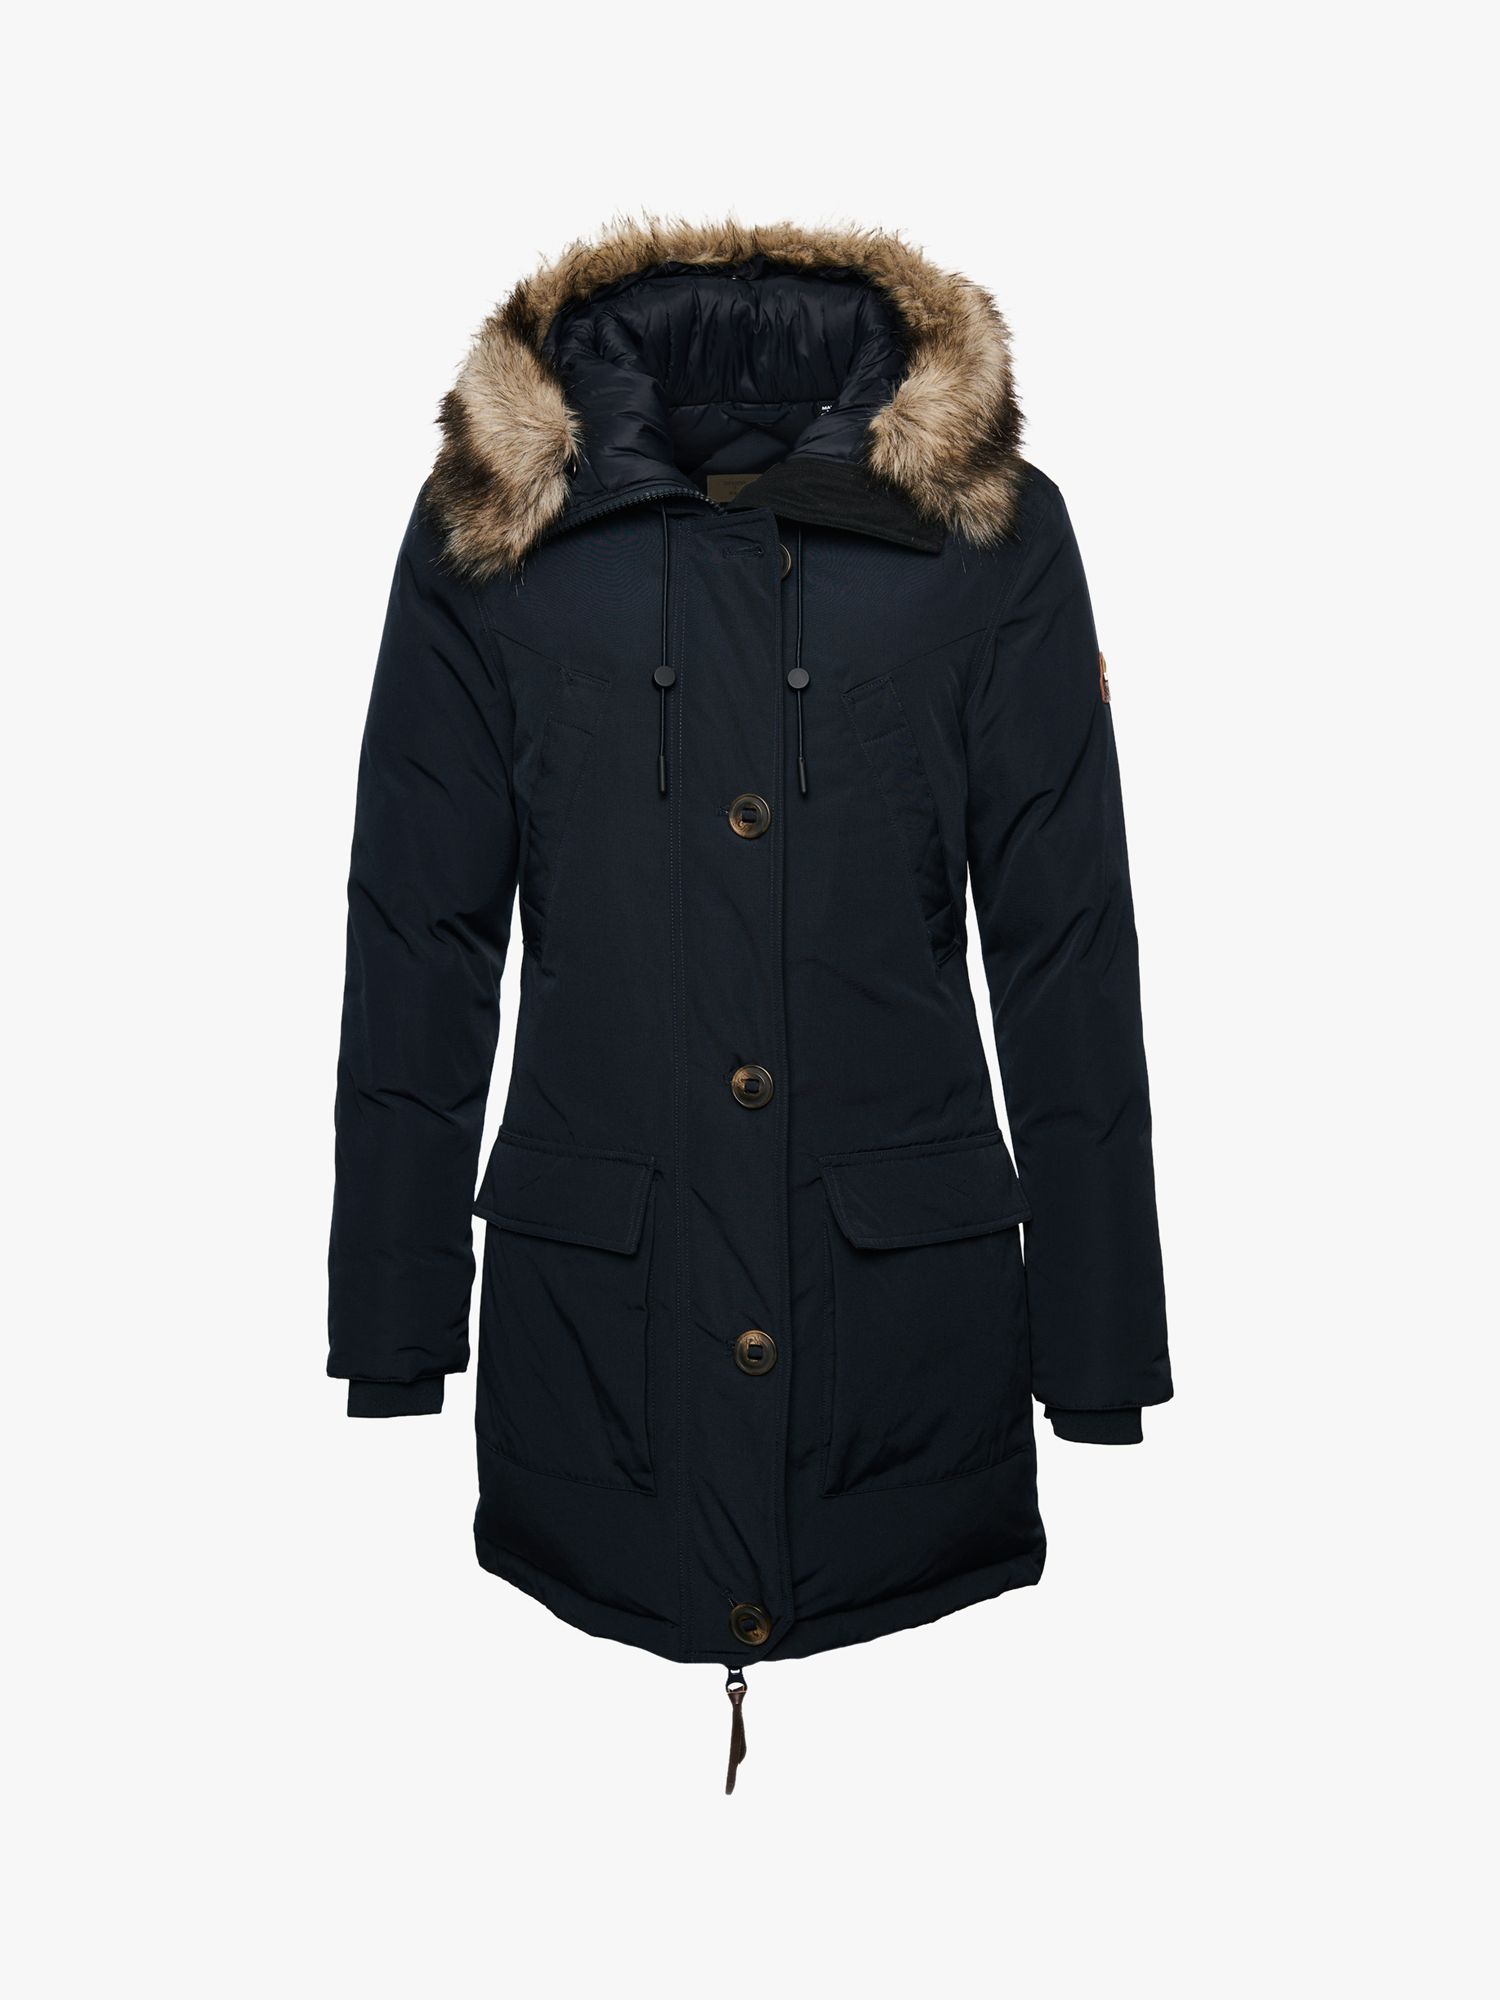 Superdry Rookie Down Parka, Navy at John Lewis & Partners